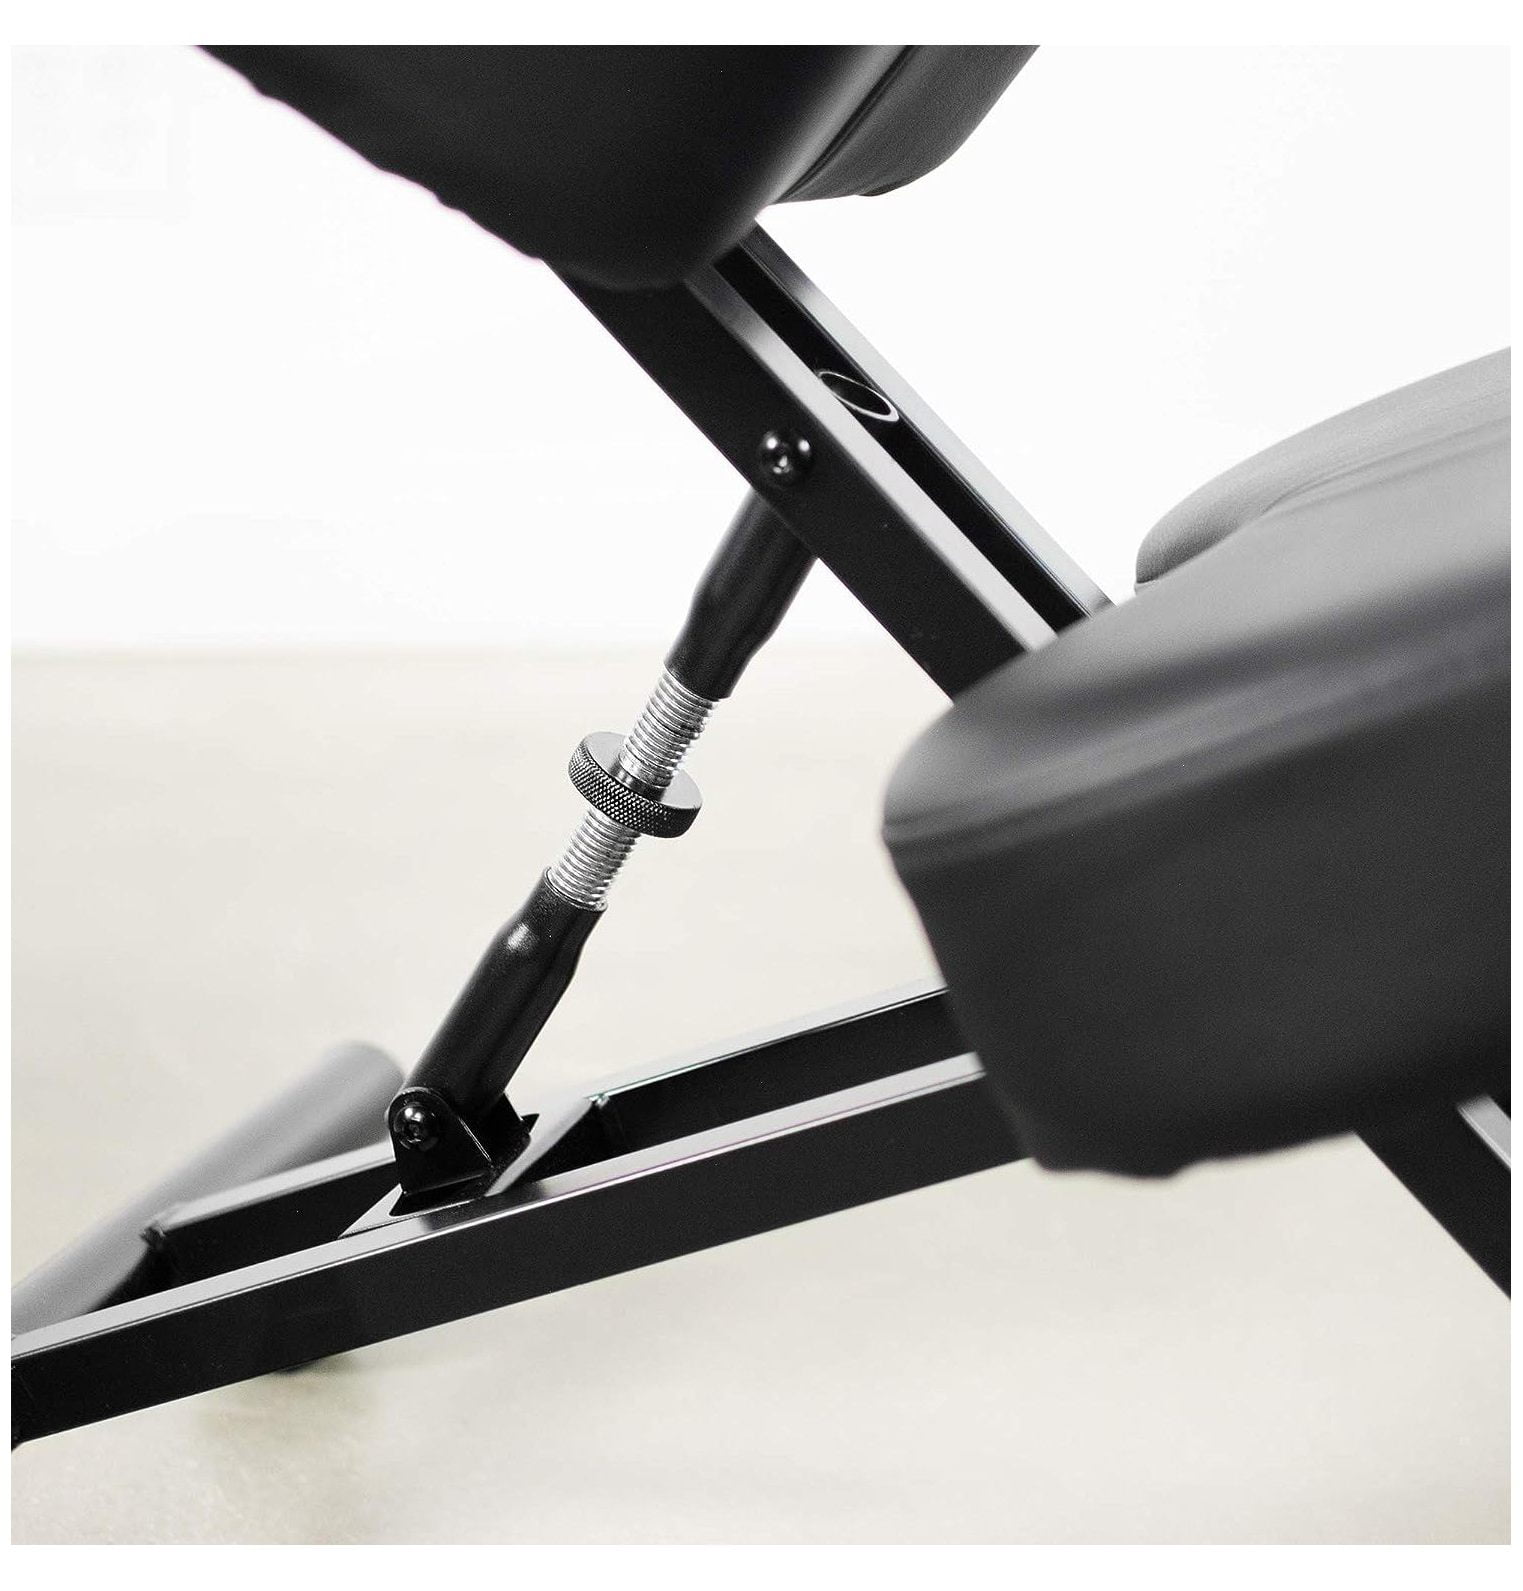 Kneeling Chair Ergonomic for Office, Adjustable Stool for Home and Office -  Improve Your Posture with an Angled Seat - Thick Comfortable Moulded Foam